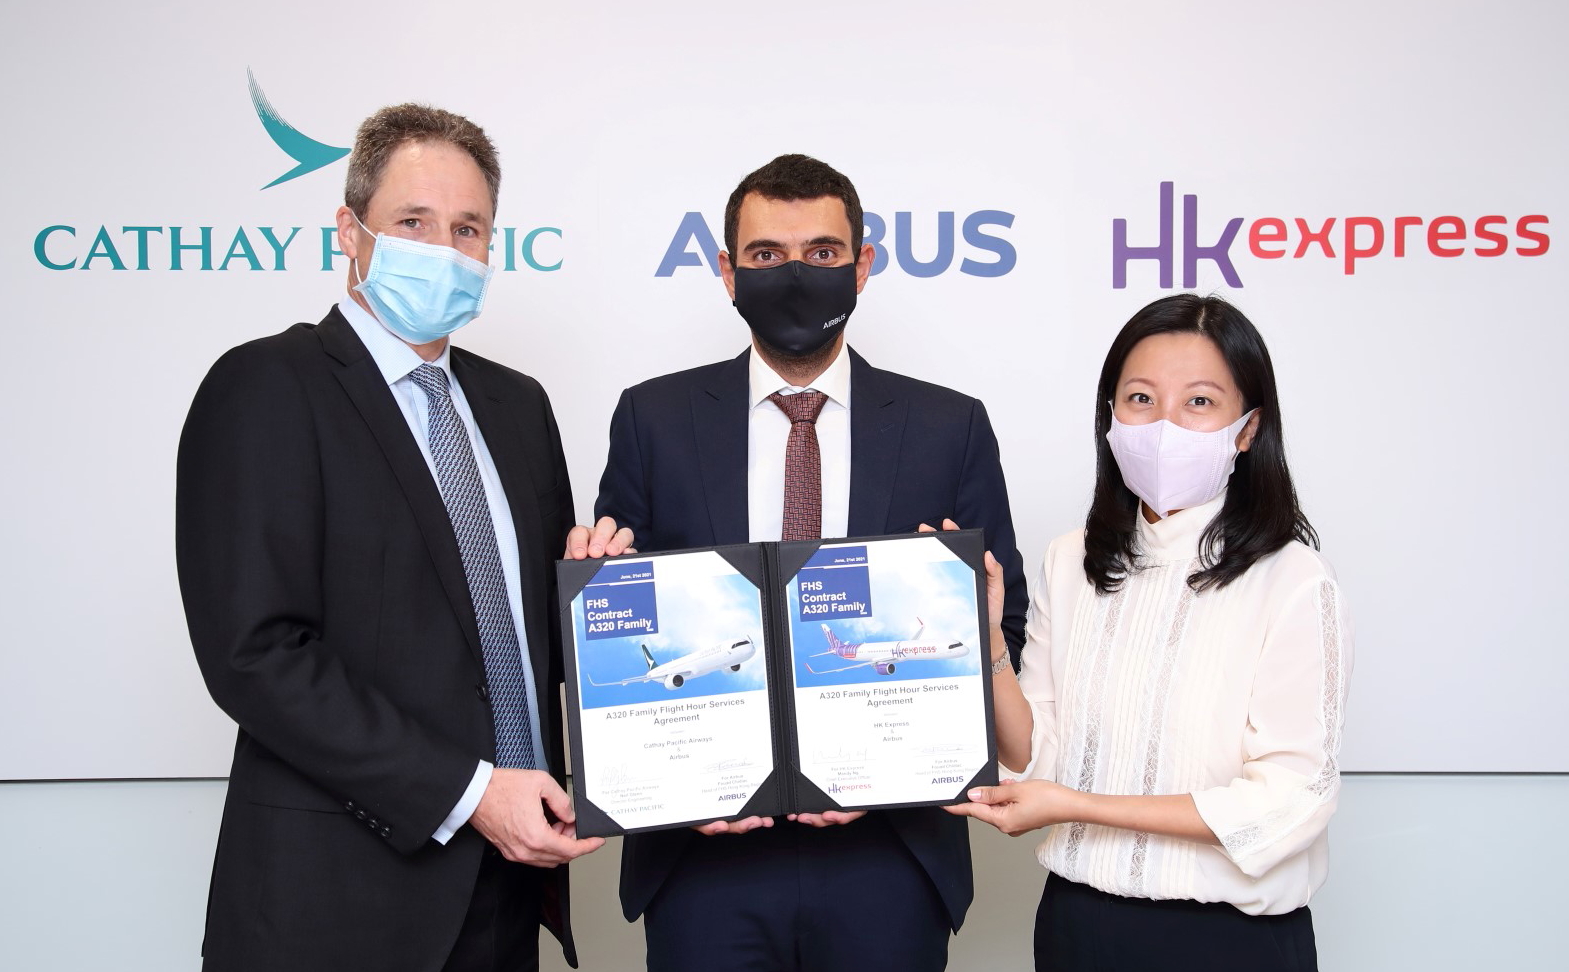 From left to right: Neil Glenn - Director Engineering Cathay Pacific, Bruno Bousquet - Head of Airbus Customer Services Asia-Pacific and Mandy Ng - CEO HK Express. Click to enlarge.